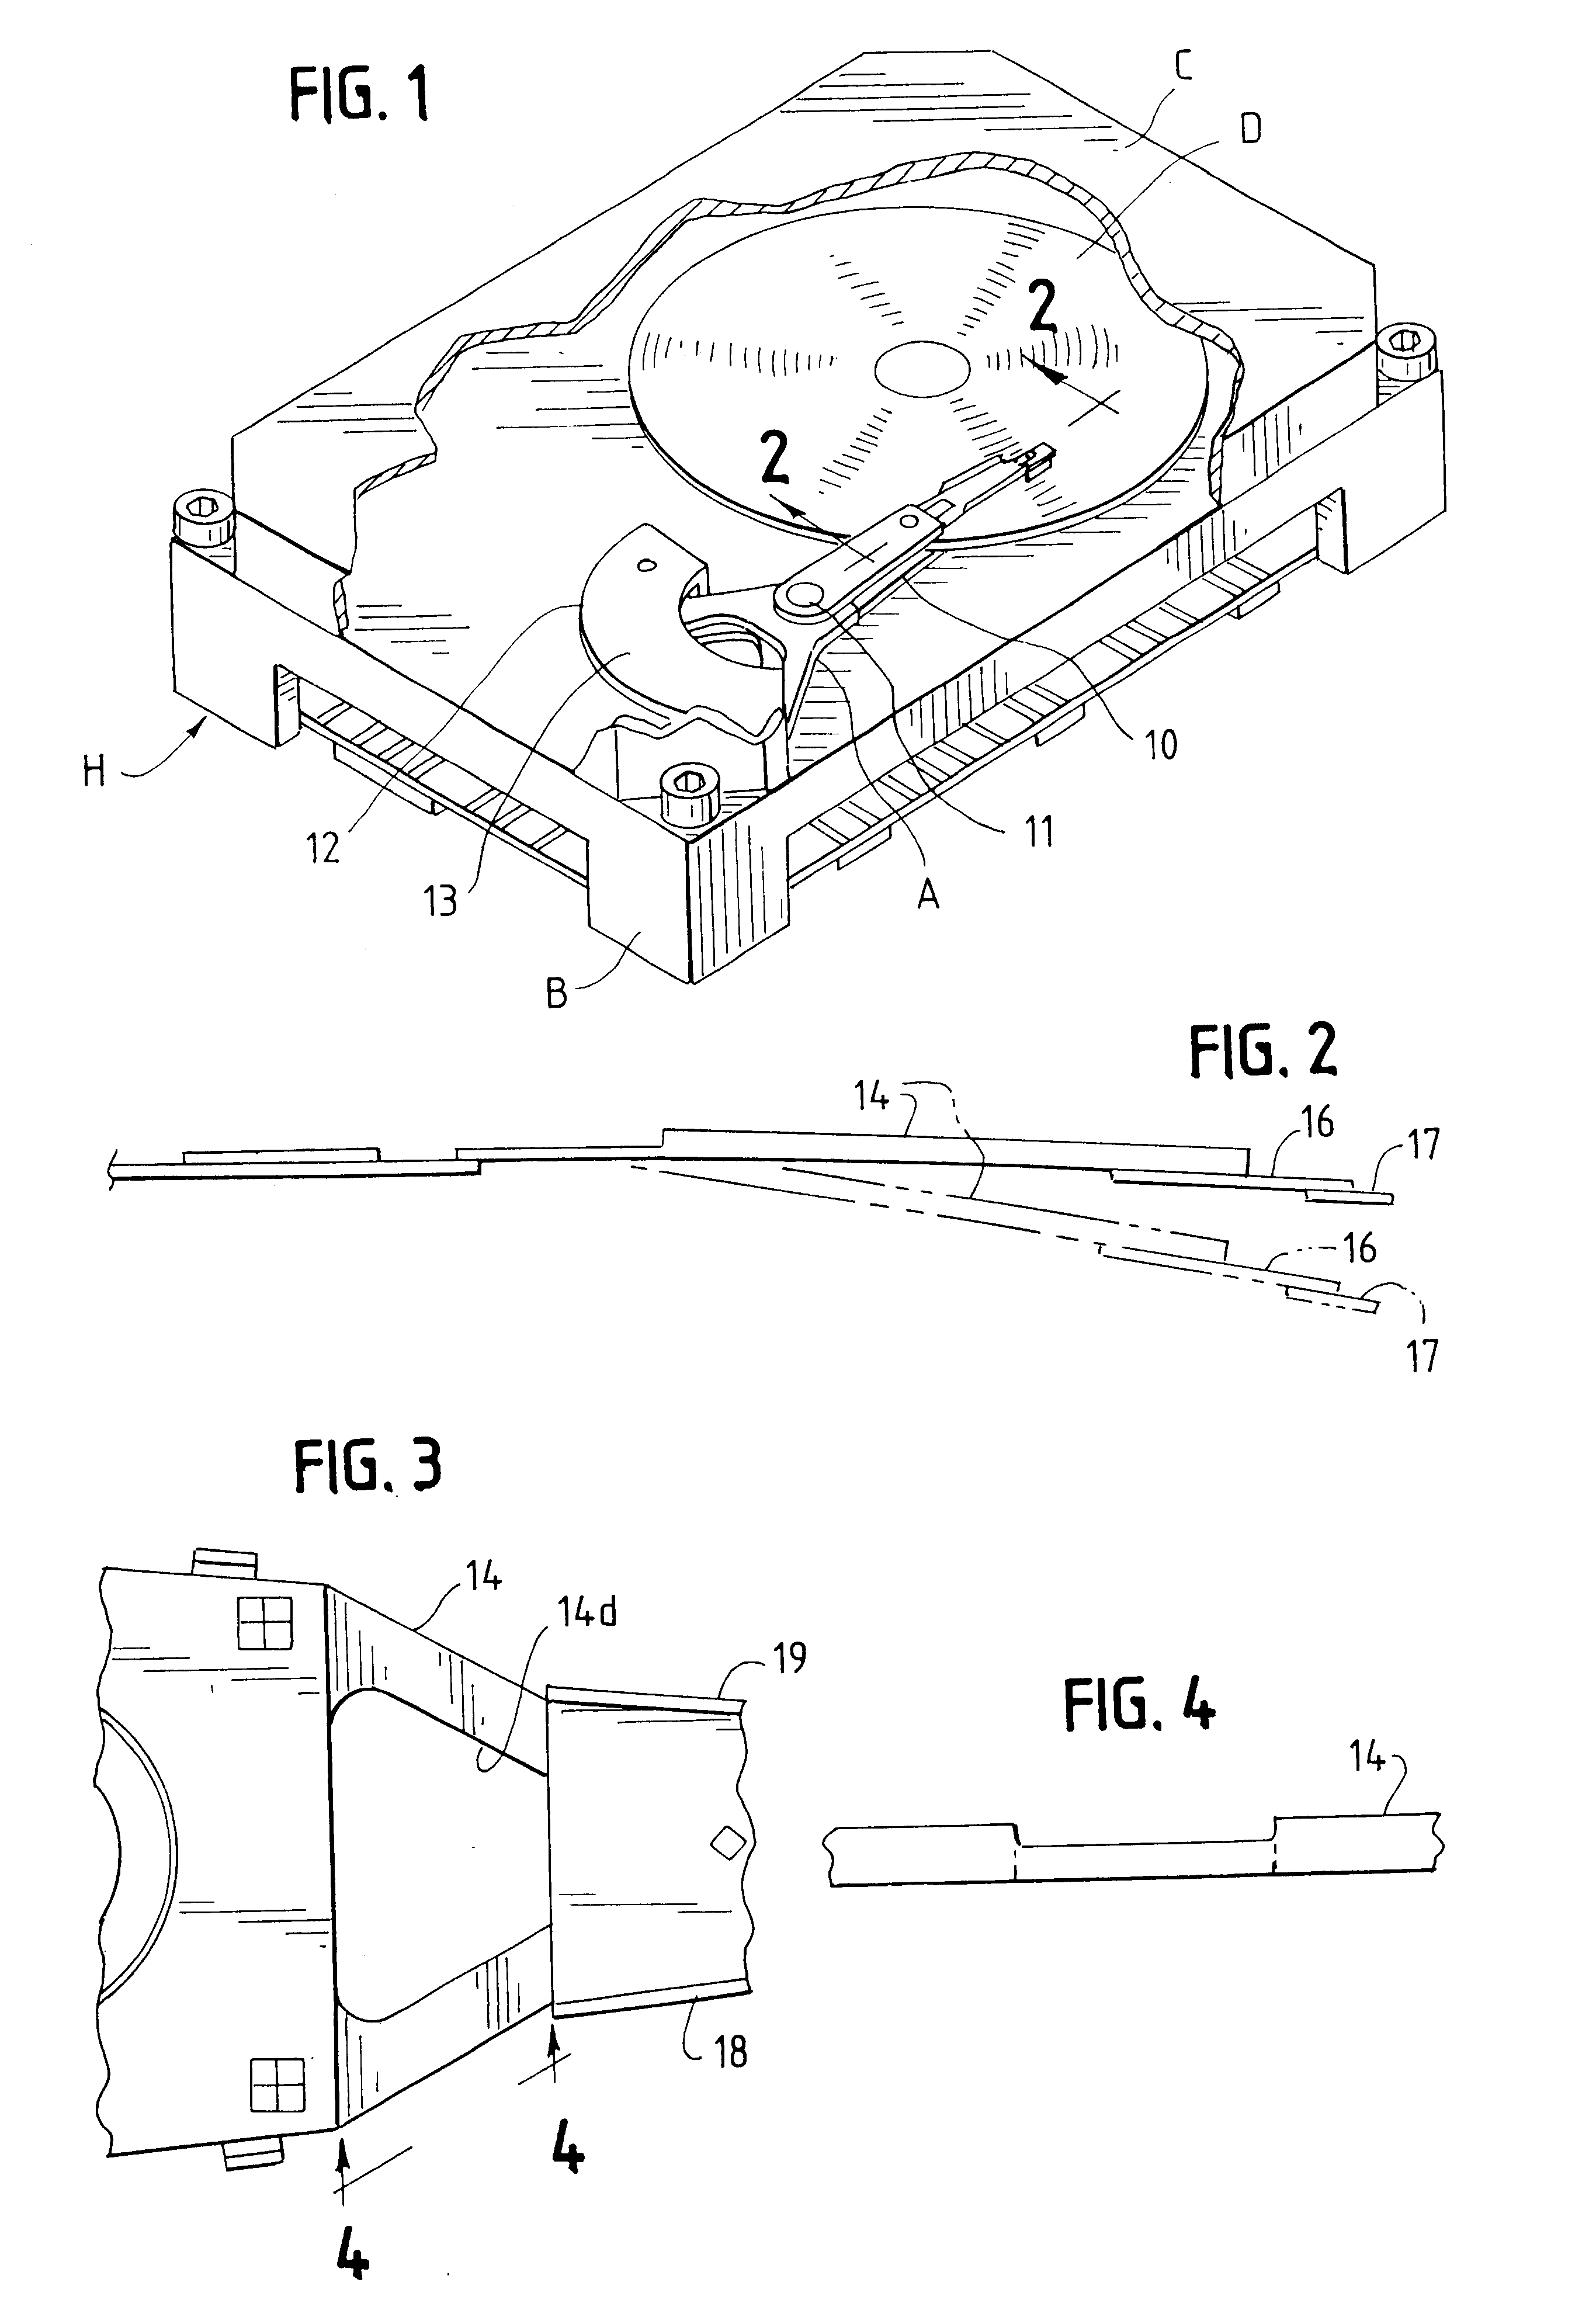 Suspension load beam for disk drive actuator with notch for reducing spring rate